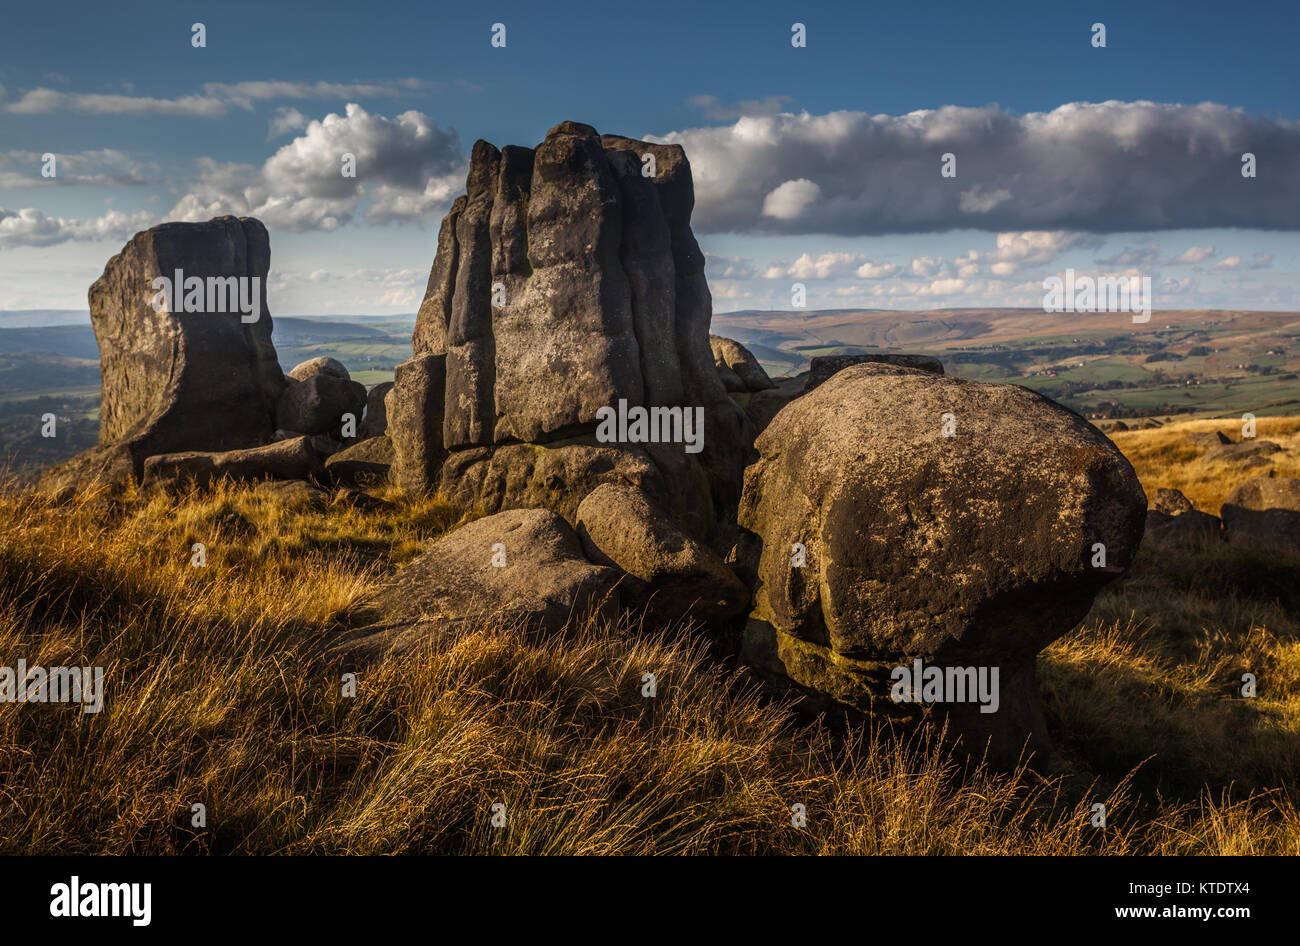 https://c8.alamy.com/comp/KTDTX4/rock-formations-called-kinder-stones-on-top-of-pots-n-pans-pots-and-KTDTX4.jpg